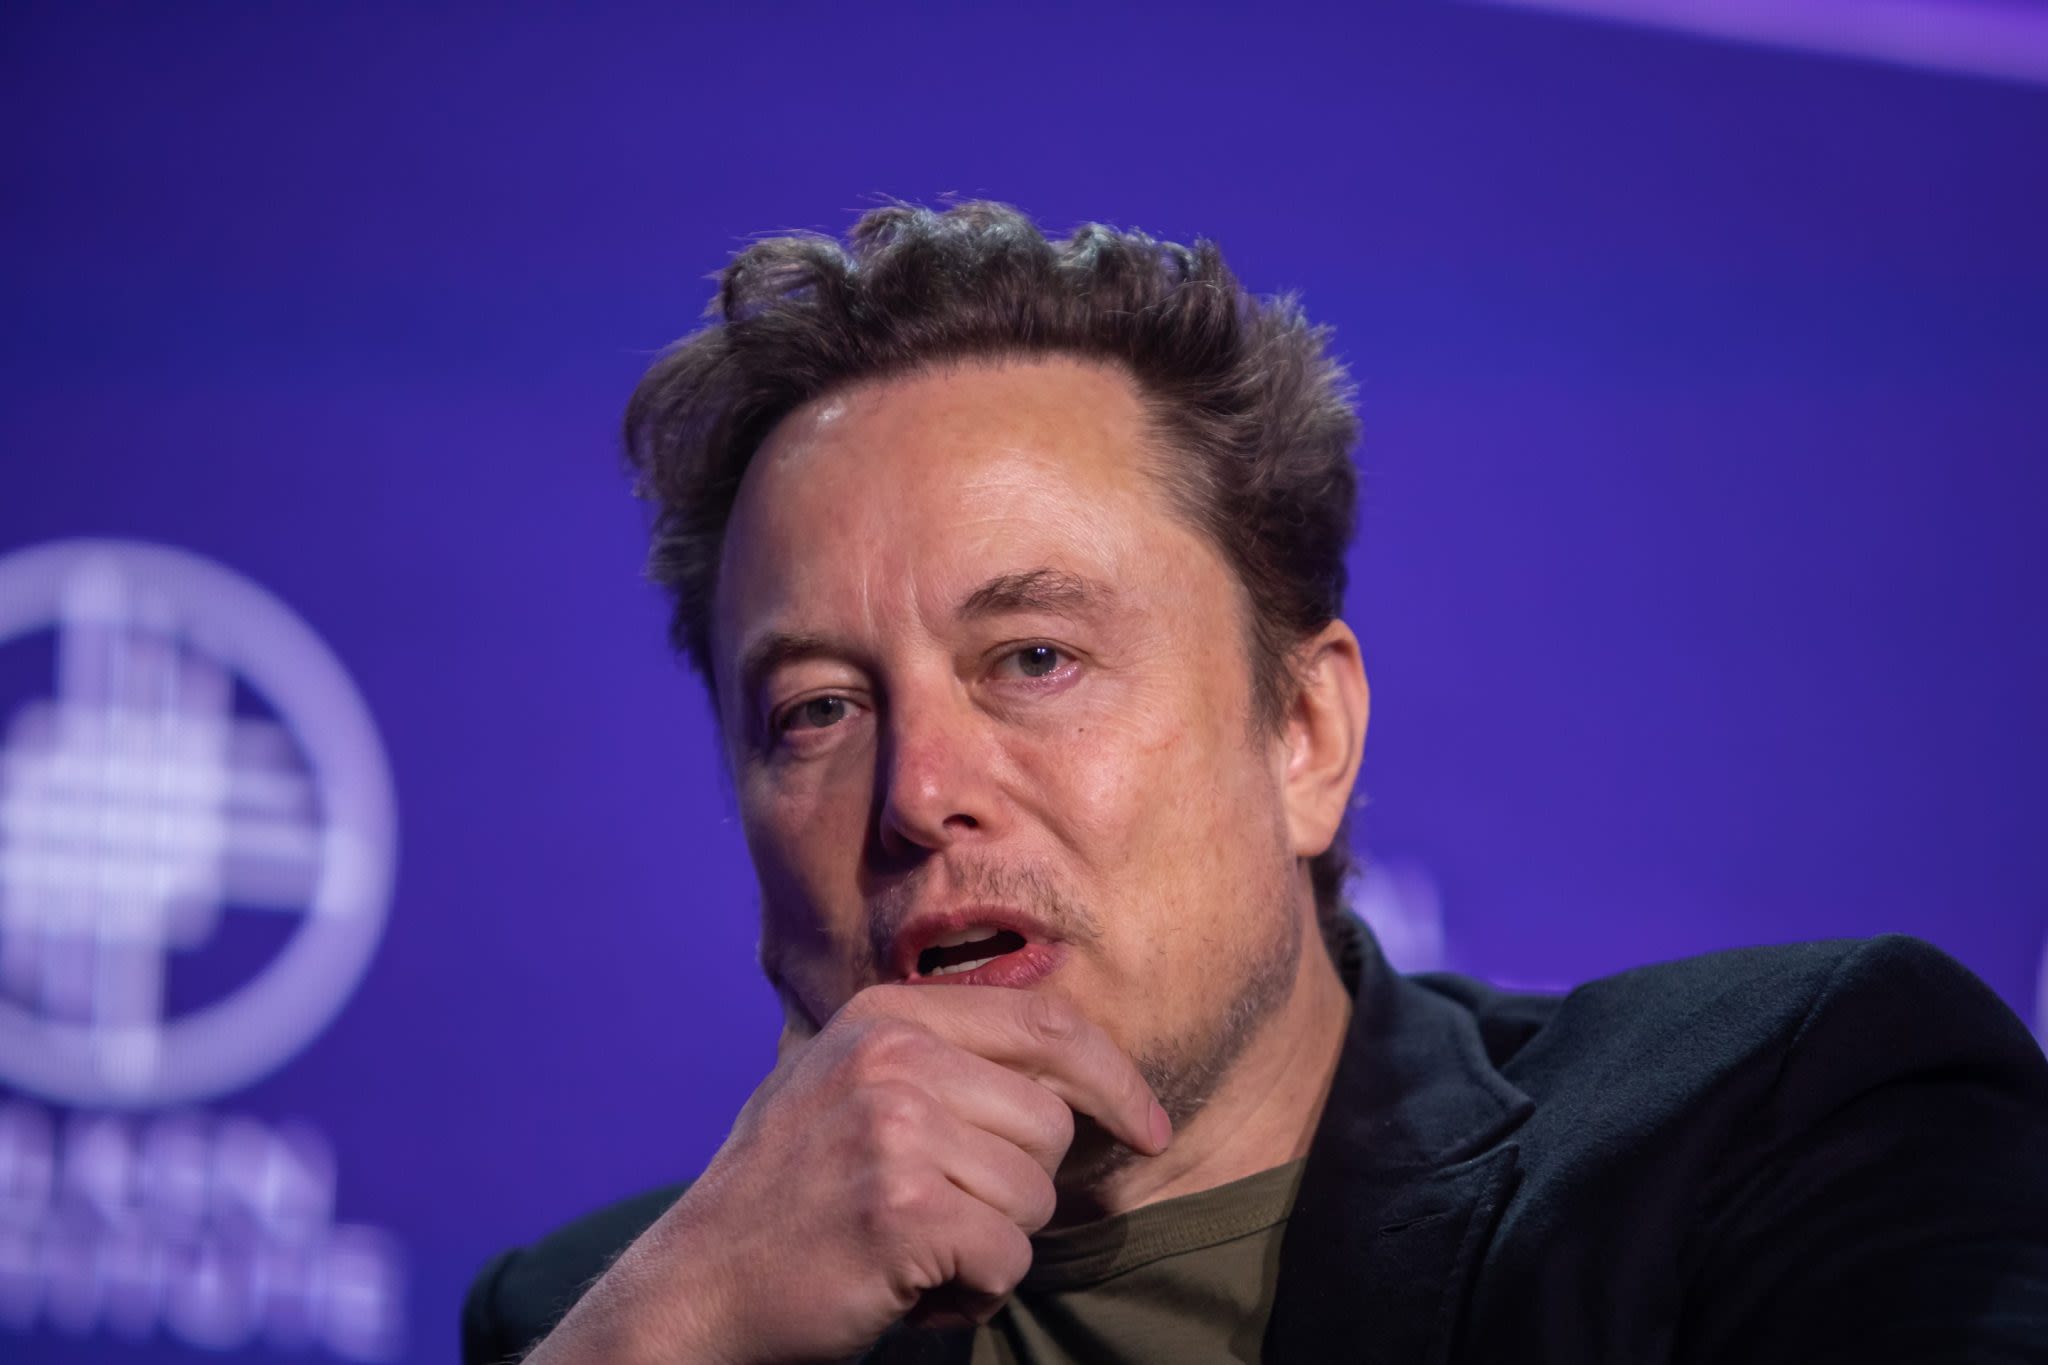 Elon Musk predicts jobs will become ‘kinda like a hobby’: ‘The AI and robots will provide any goods and services you want’